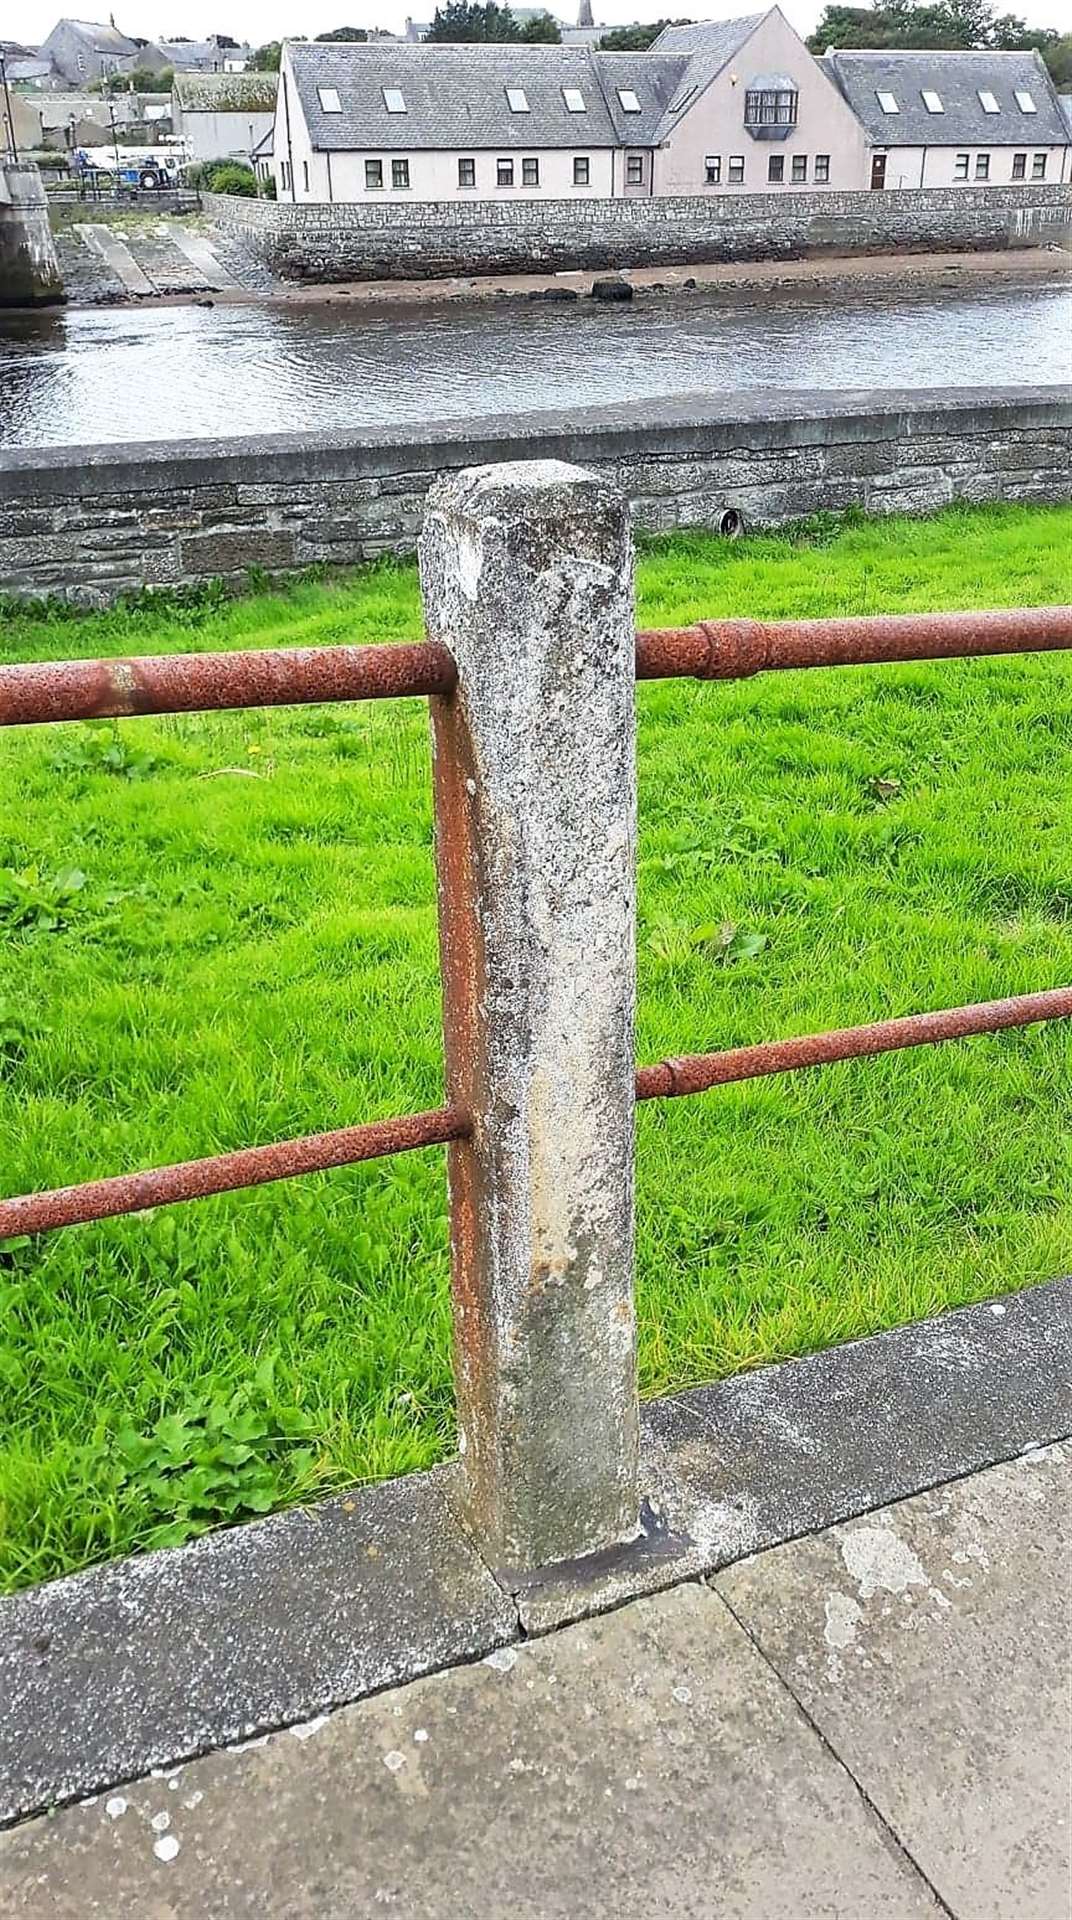 Concrete posts like this and railings will be fixed.